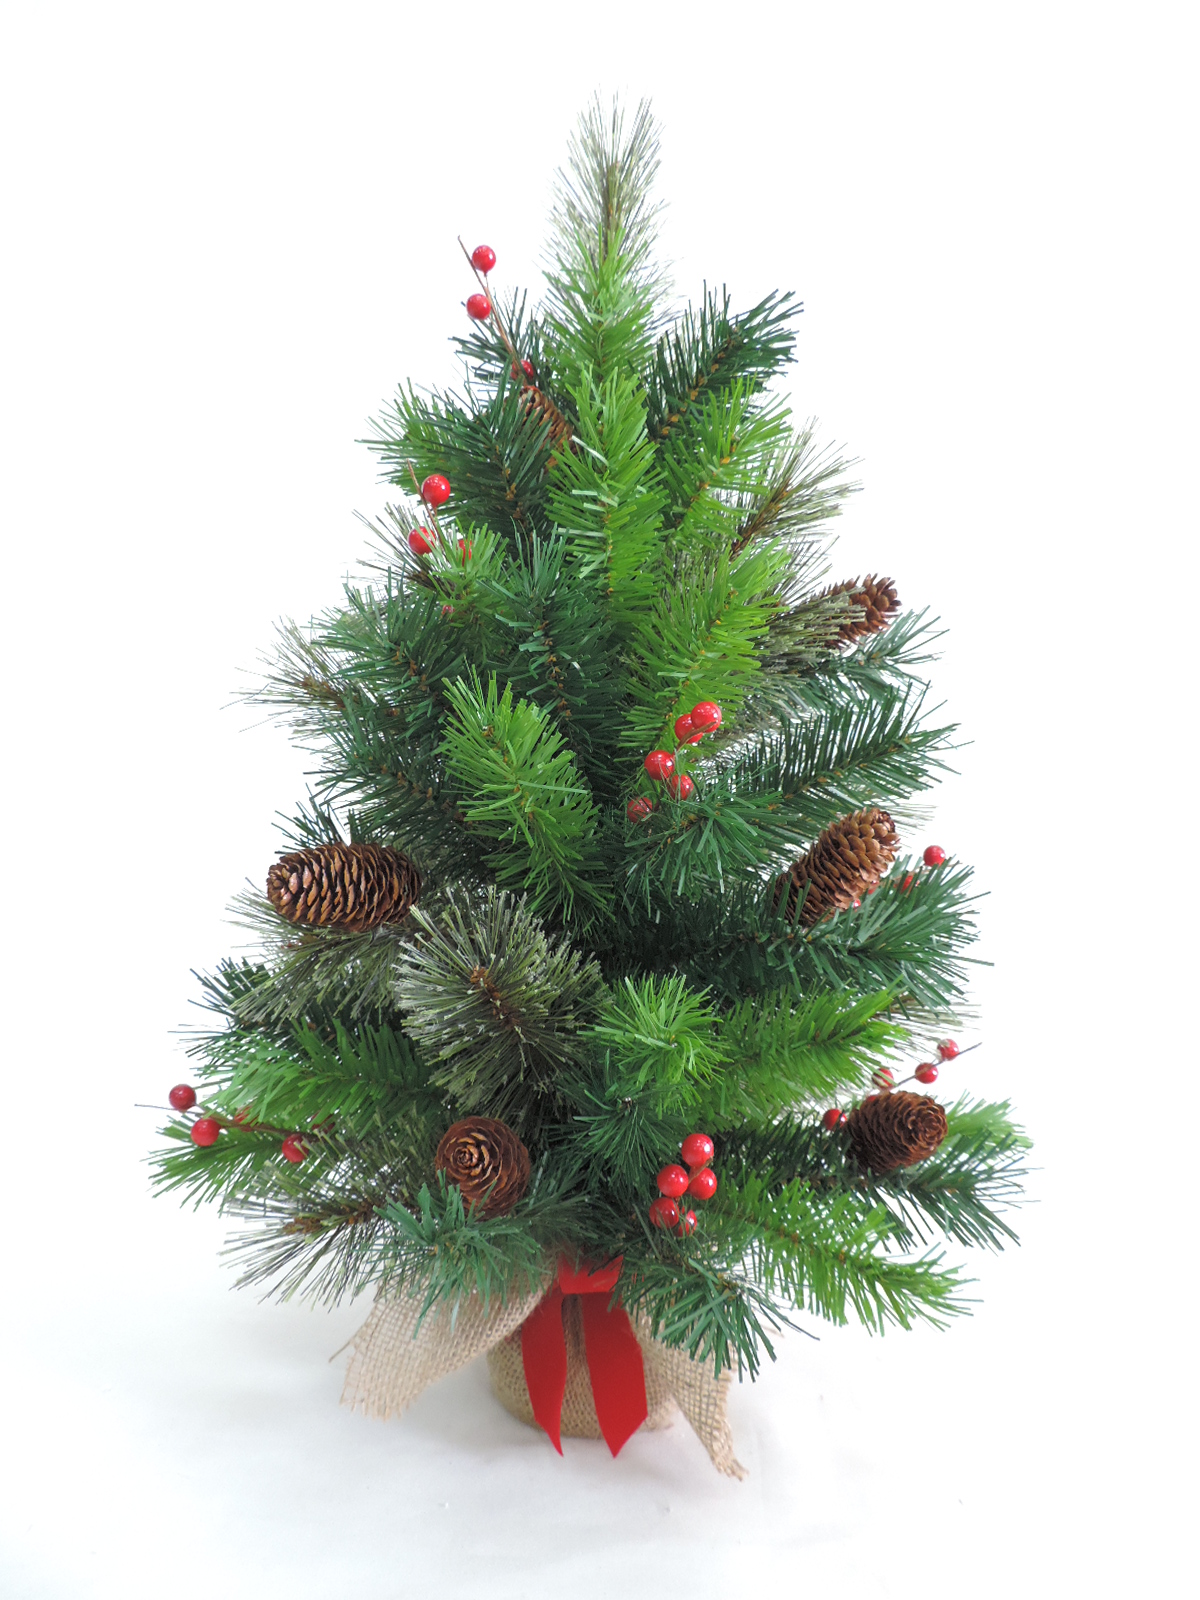 96% of overseas artificial Christmas trees are made in China